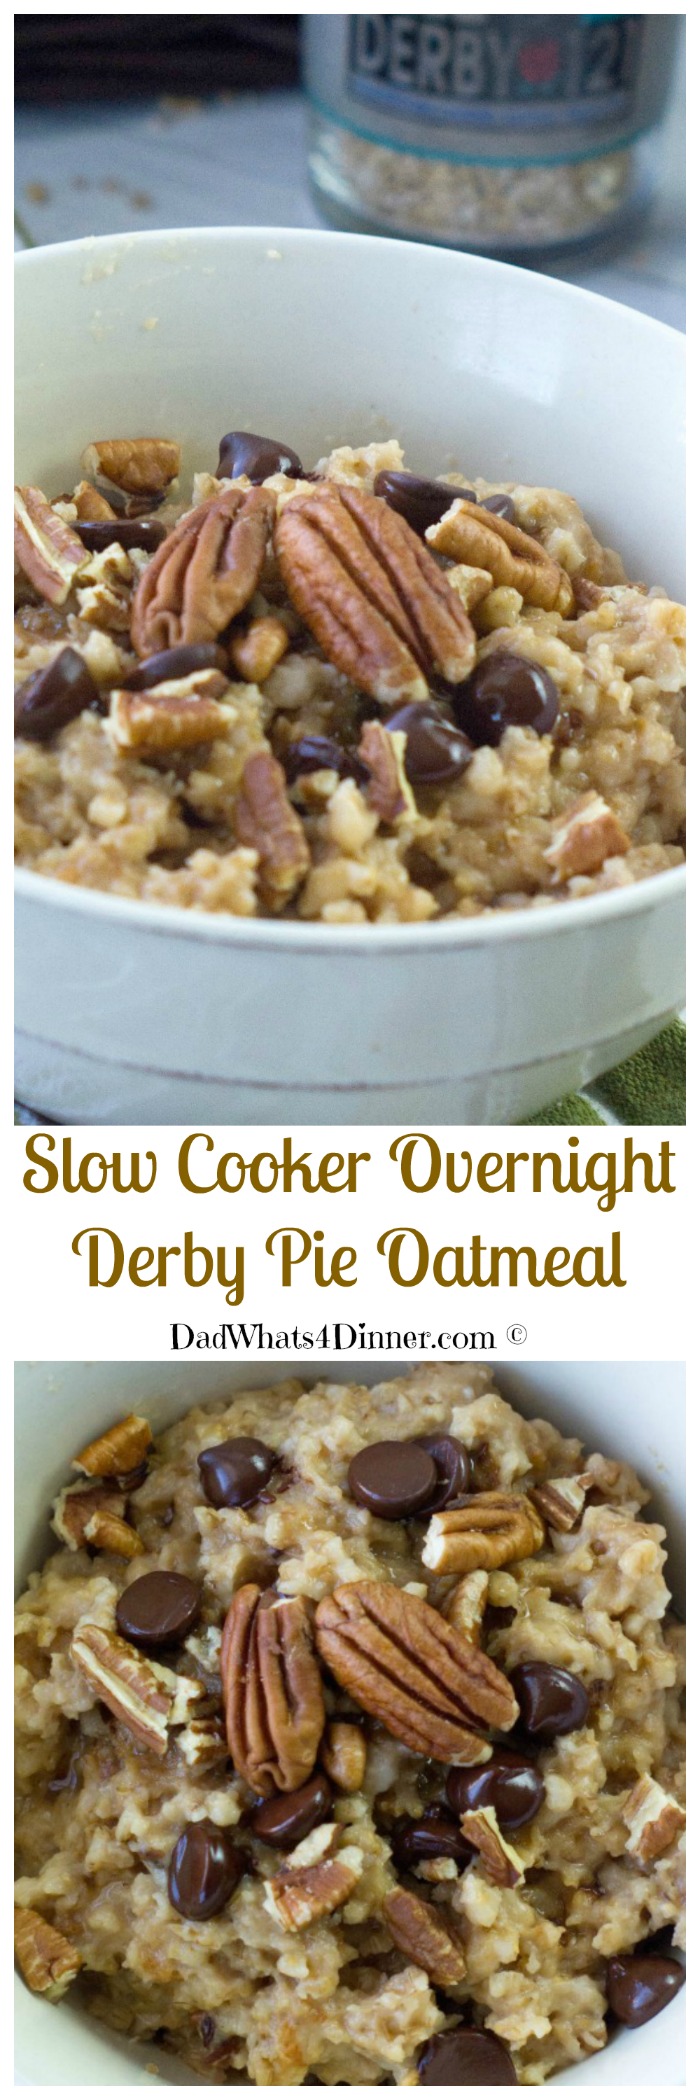 Derby Pie for Breakfast! Yes, sir with my Slow Cooker Overnight Derby Pie Oatmeal Recipe!